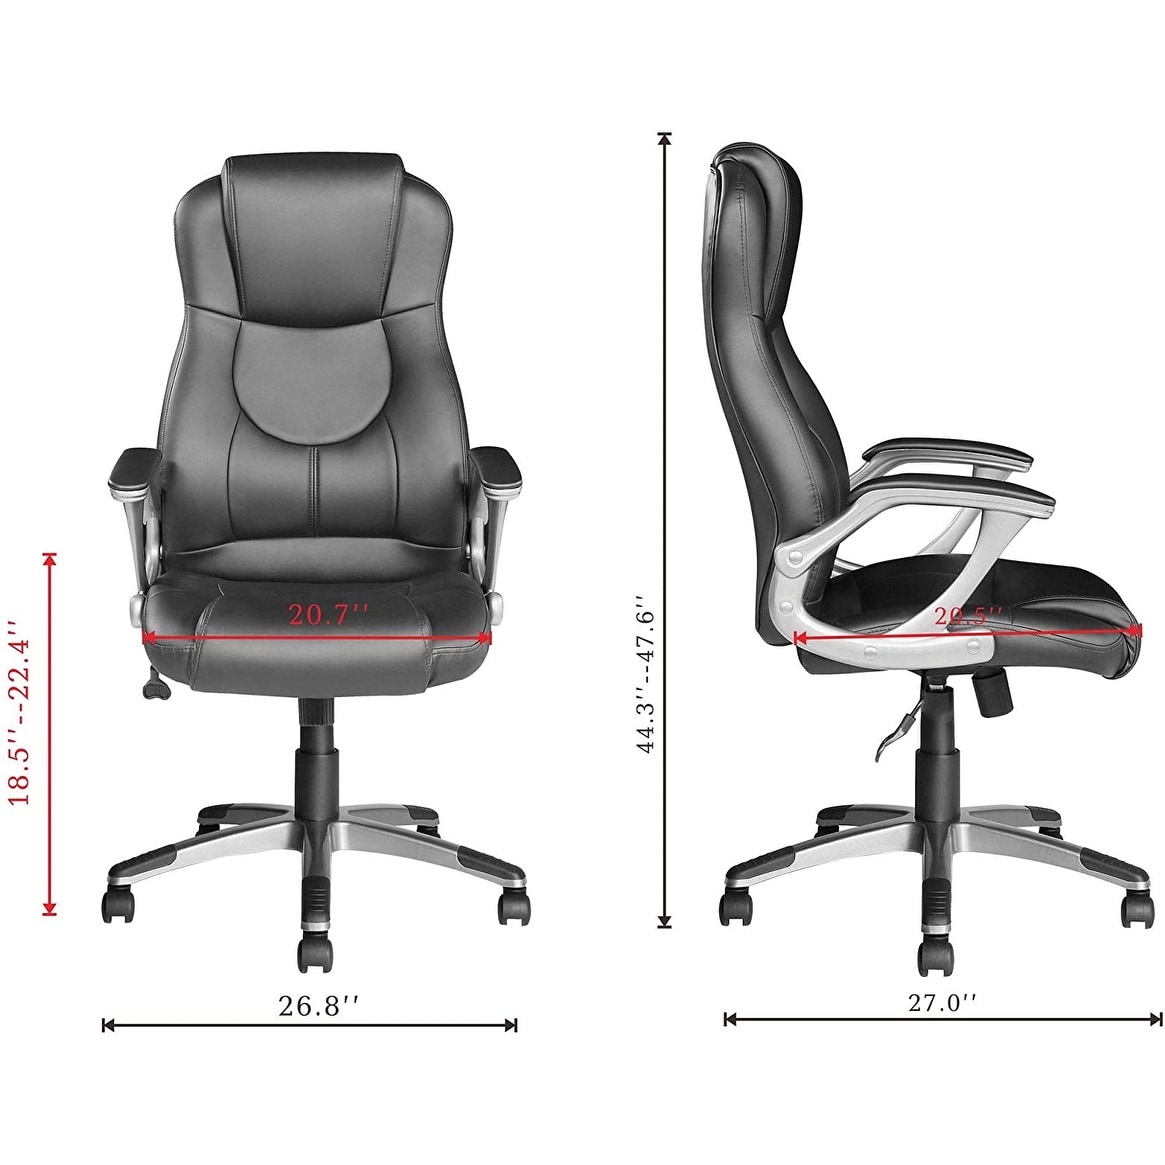 https://ak1.ostkcdn.com/images/products/is/images/direct/679537b8cc2f11ba8251fe410ef7e39af764f549/JJS-High-Back-Swivel-Ergonomic-Executive-Office-Chair-with-Arms-Rest-Back-Lumbar-Support.jpg